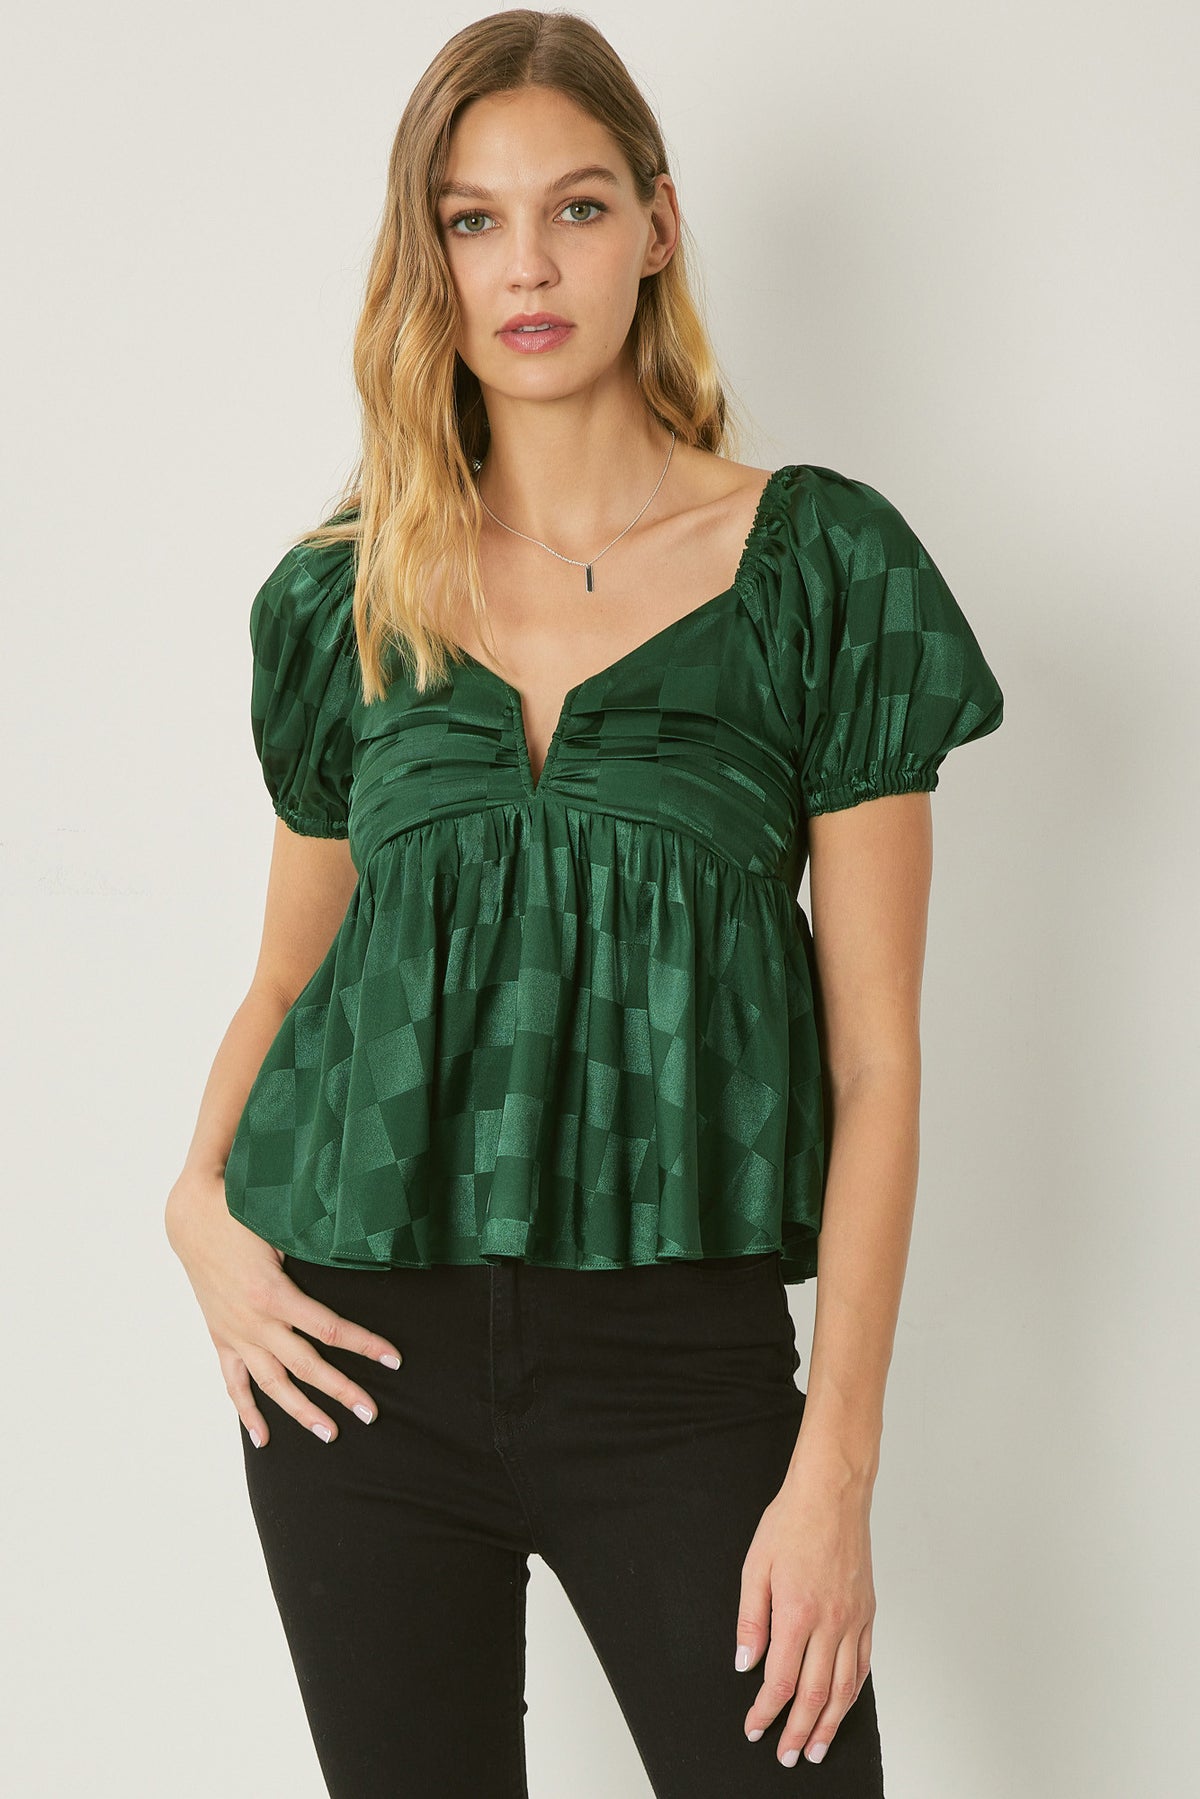 Labor Of Love Top - Heather Green